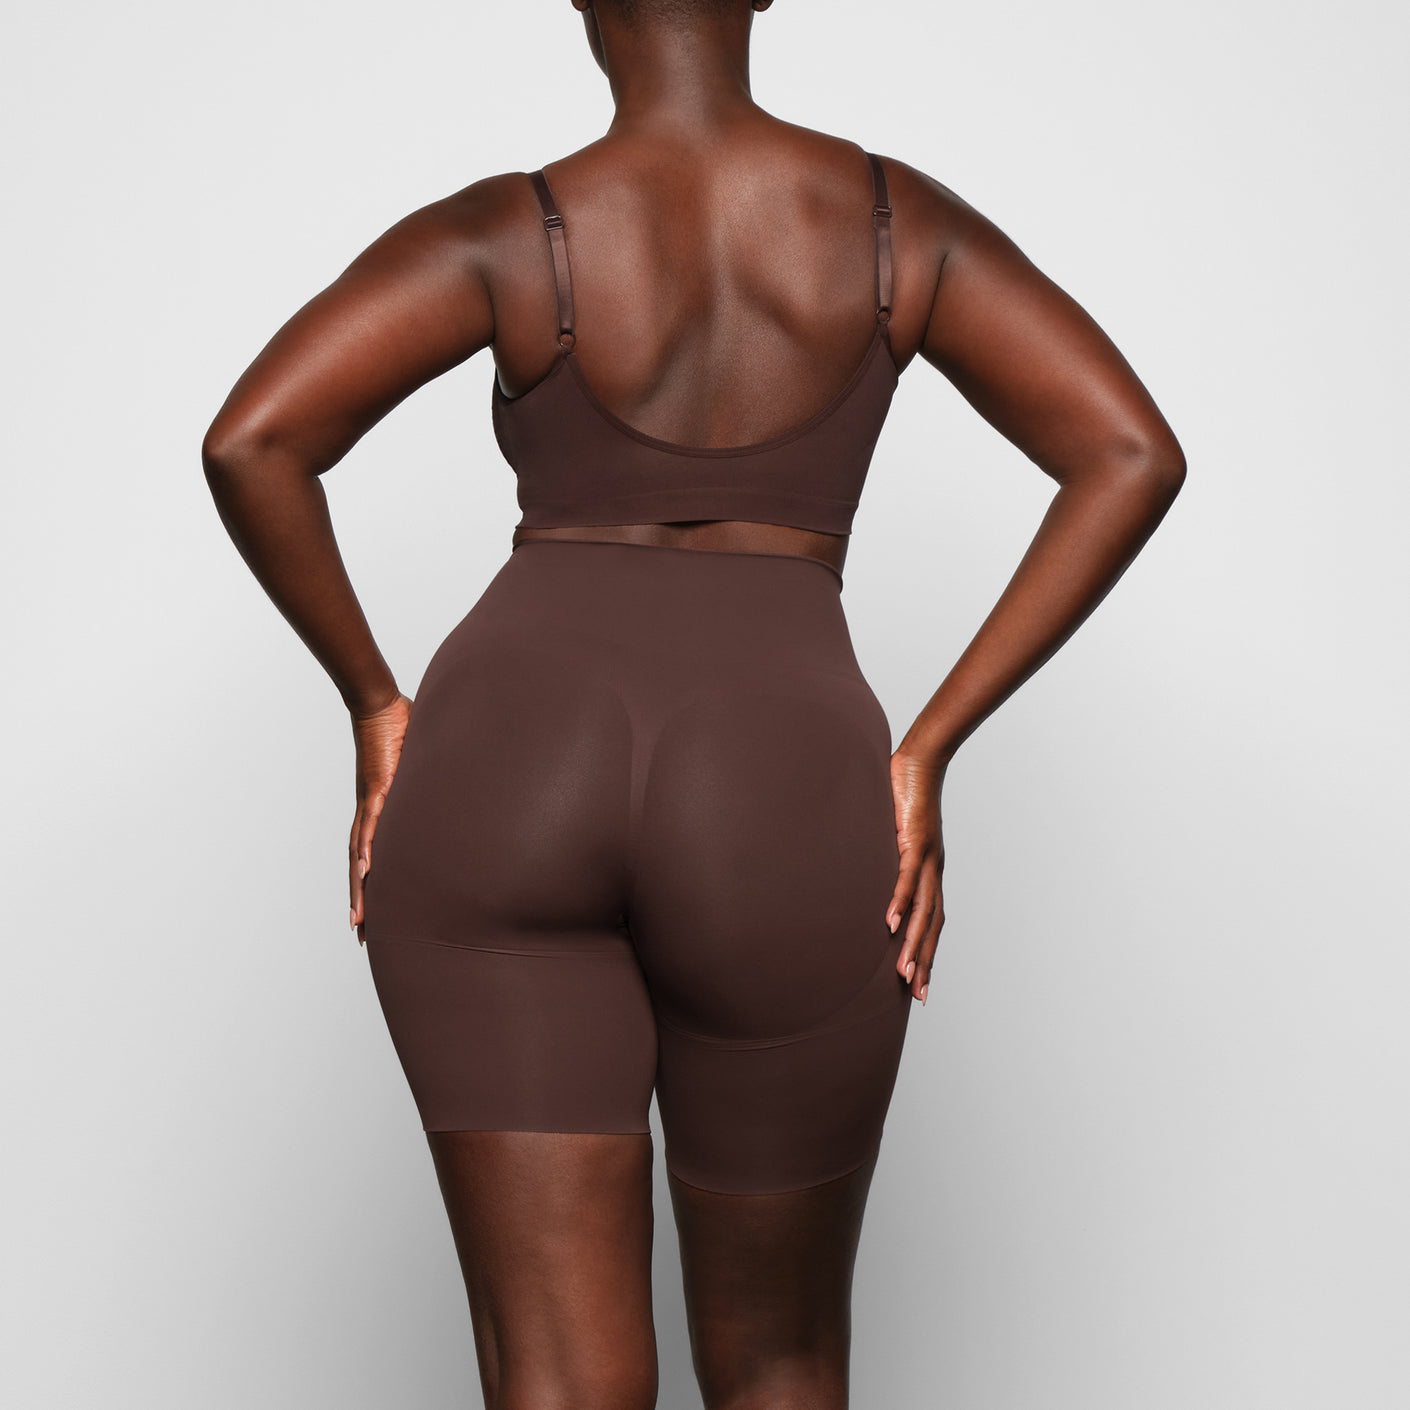 SKIMS - COMING SOON: BUTT-ENHANCING SHAPEWEAR. Introducing new,  game-changing solutions that lift, shape, and support your butt like never  before. Made with our proprietary Seamless Sculpt fabric, 2 new styles drop  this